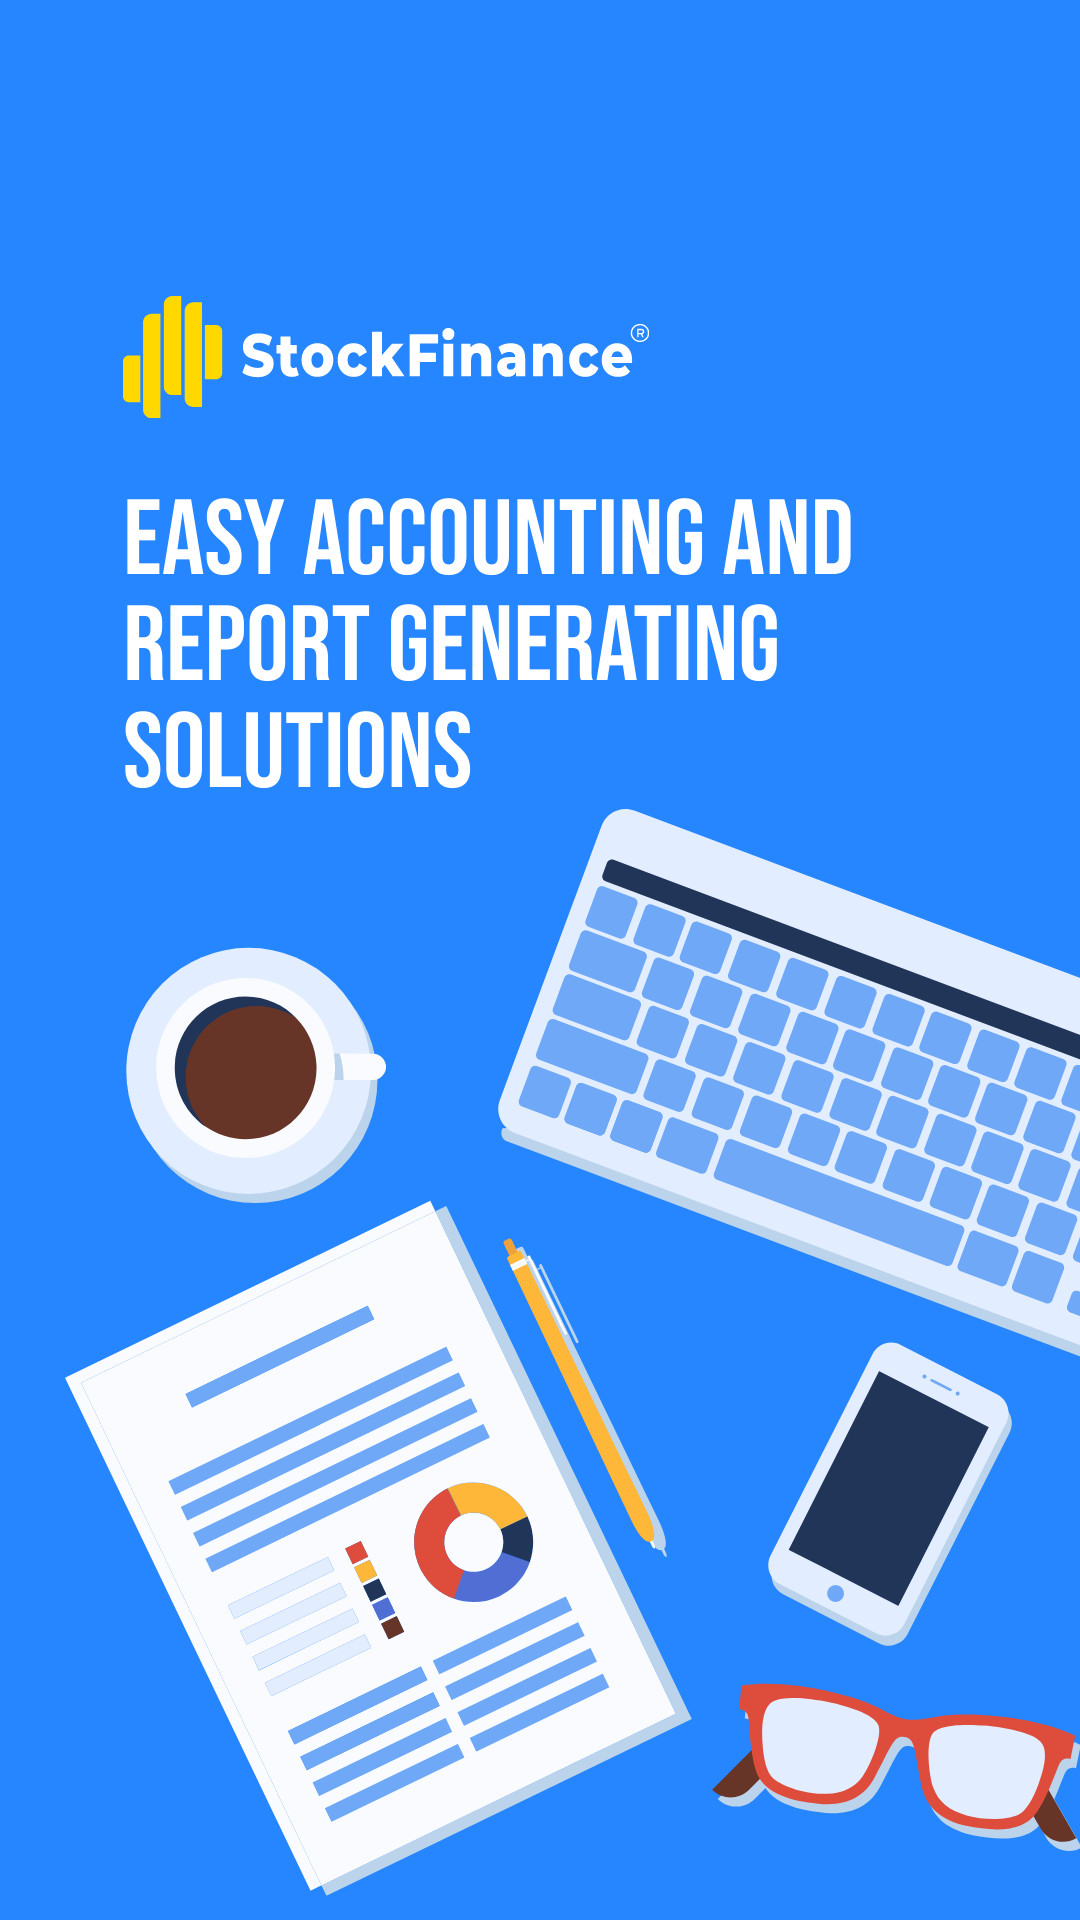 Easy Accounting and Report Generating